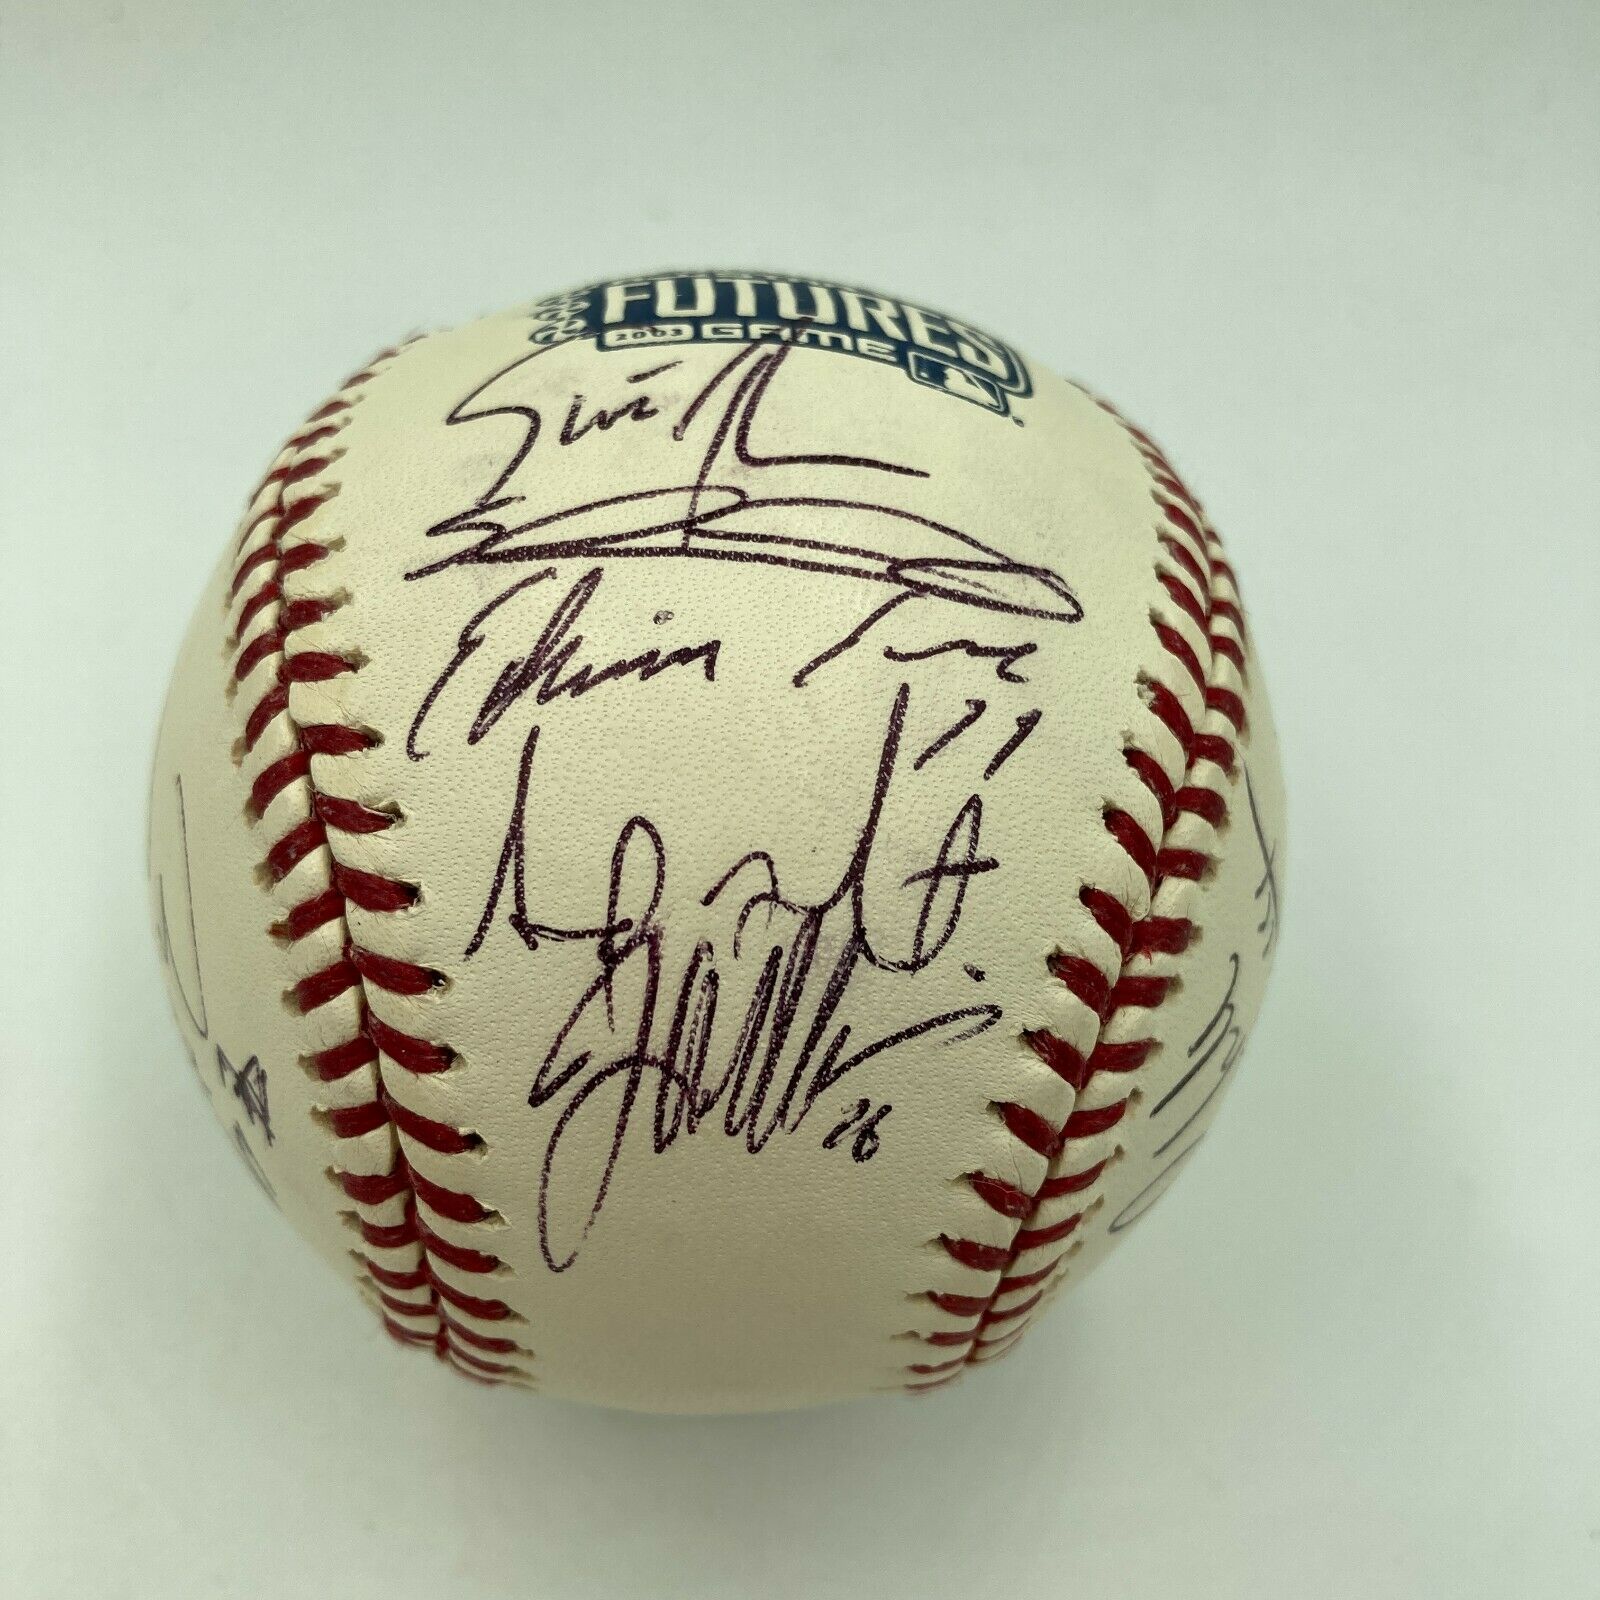 Cabrera Exclusive! Autographed Game-Used Baseball: Miguel Cabrera 2,500th  Hit Game - Victor Martinez HBP (MLB AUTHENTICATED)